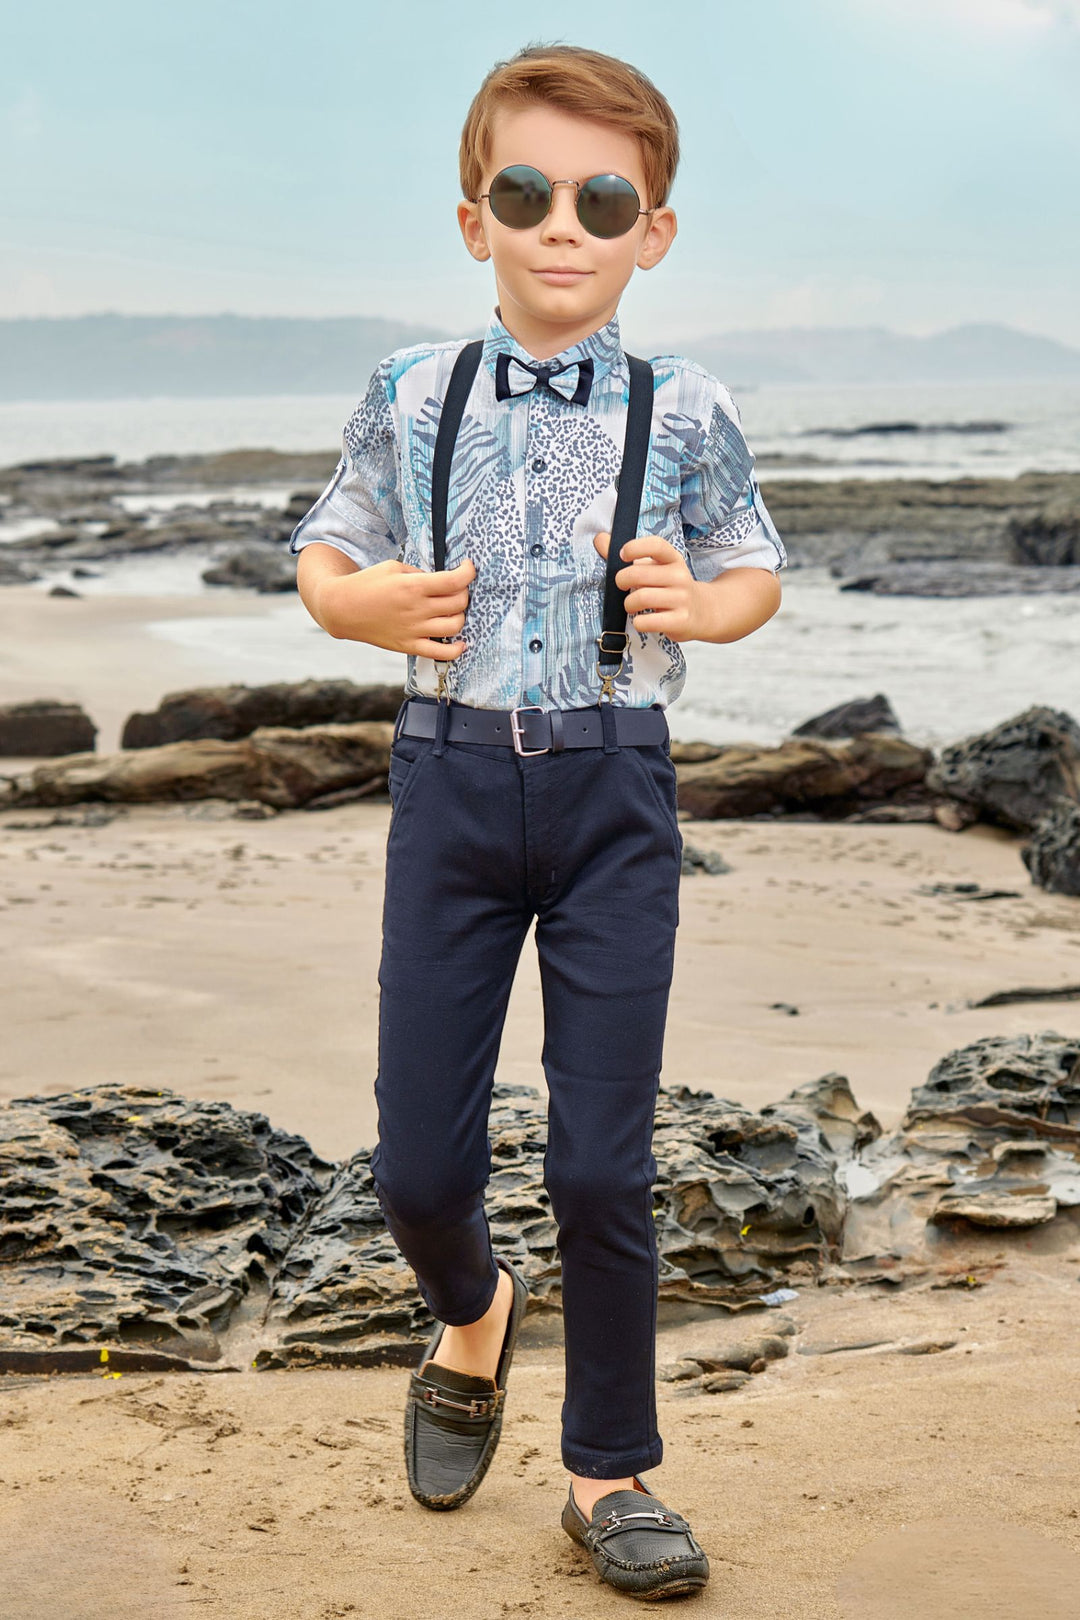 White with Navy Blue Printed Suspender Style Pant Shirt Set for Boys with Bow and Belt